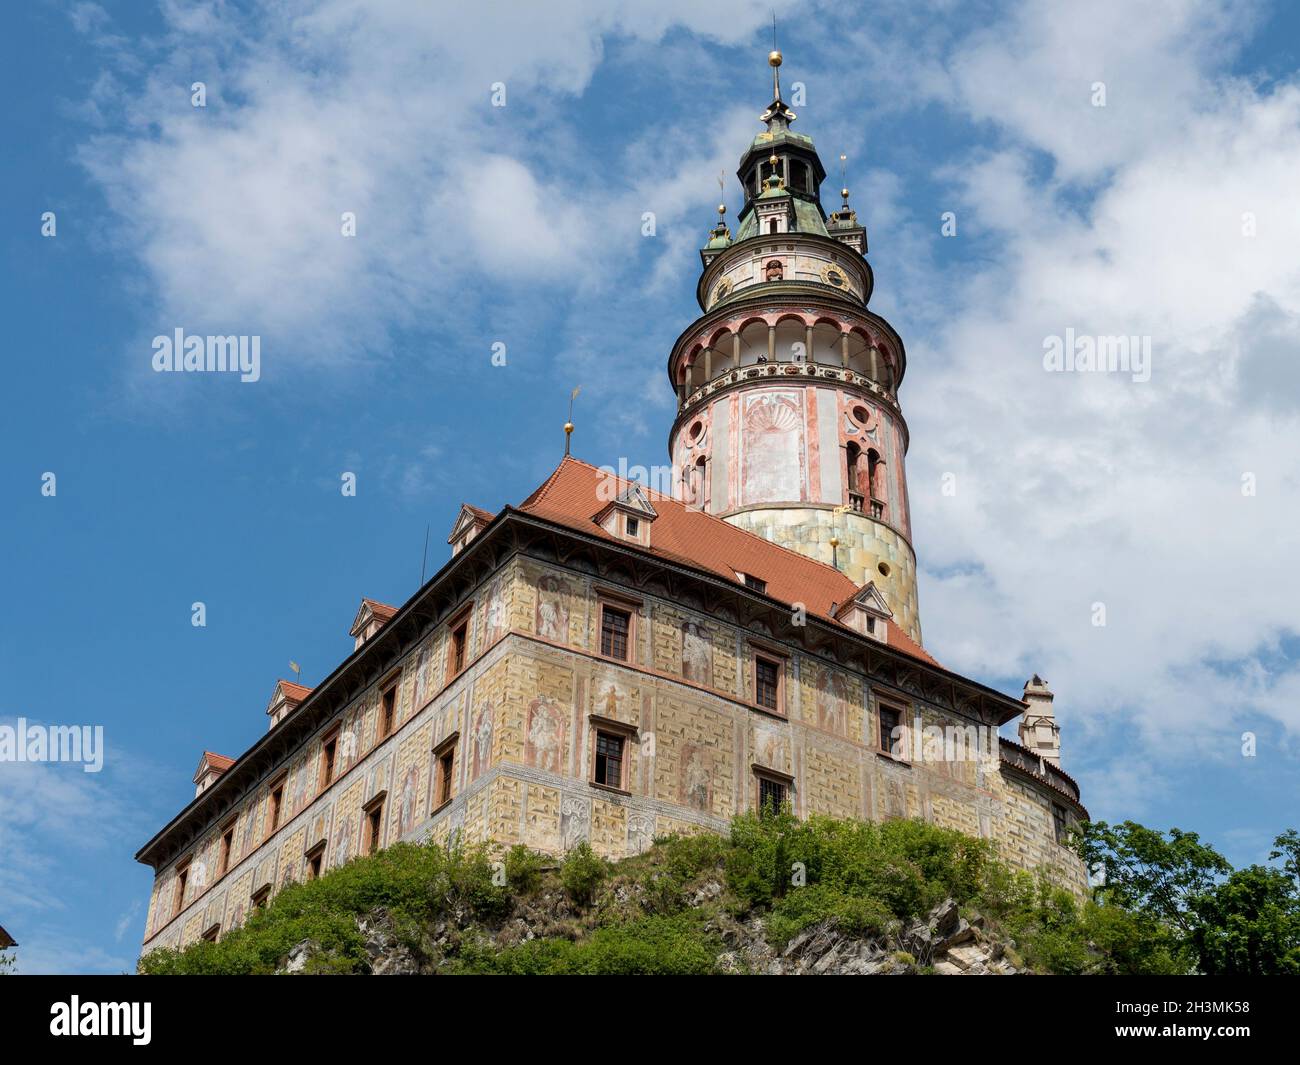 Český Krumlov Castle Tower from the hill below: This high round renaissance tower dominates the skyline in the small town of Český Krumlov. Fresco paintings decorate its facade. Stock Photo